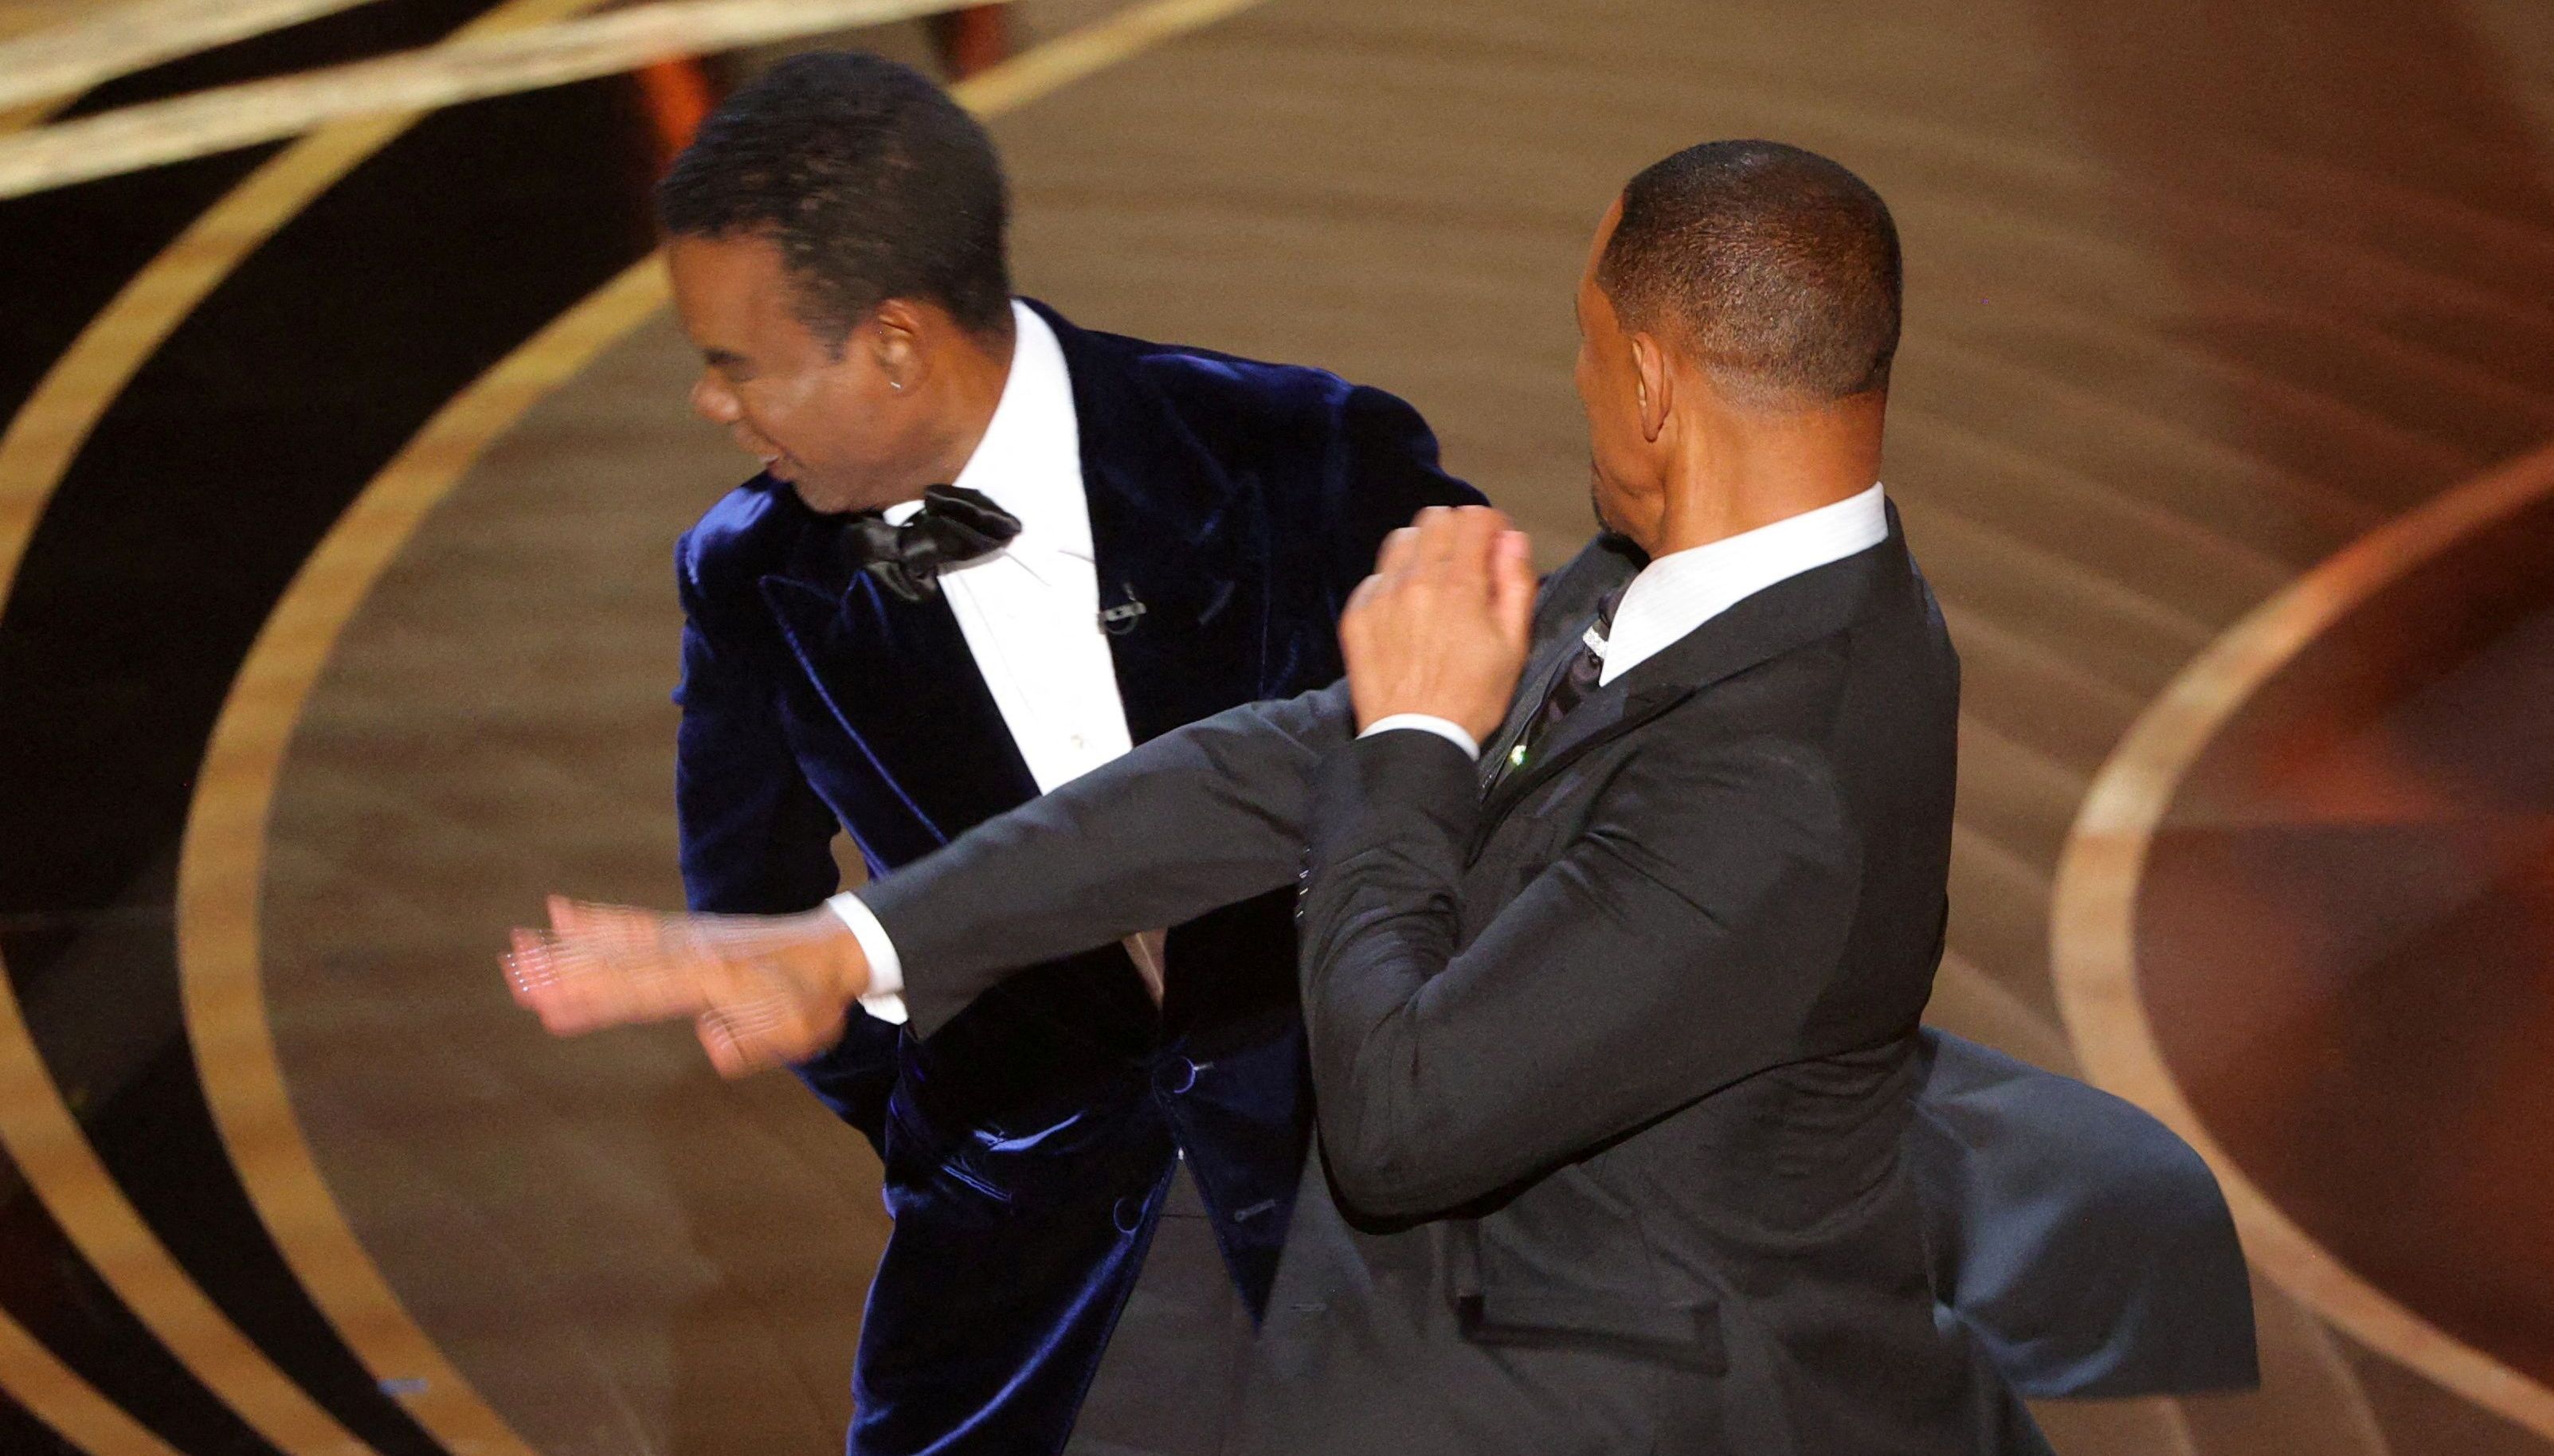 Will Smith hits at Chris Rock as Rock spoke on stage during the 94th Academy Awards in Hollywood, Los Angeles